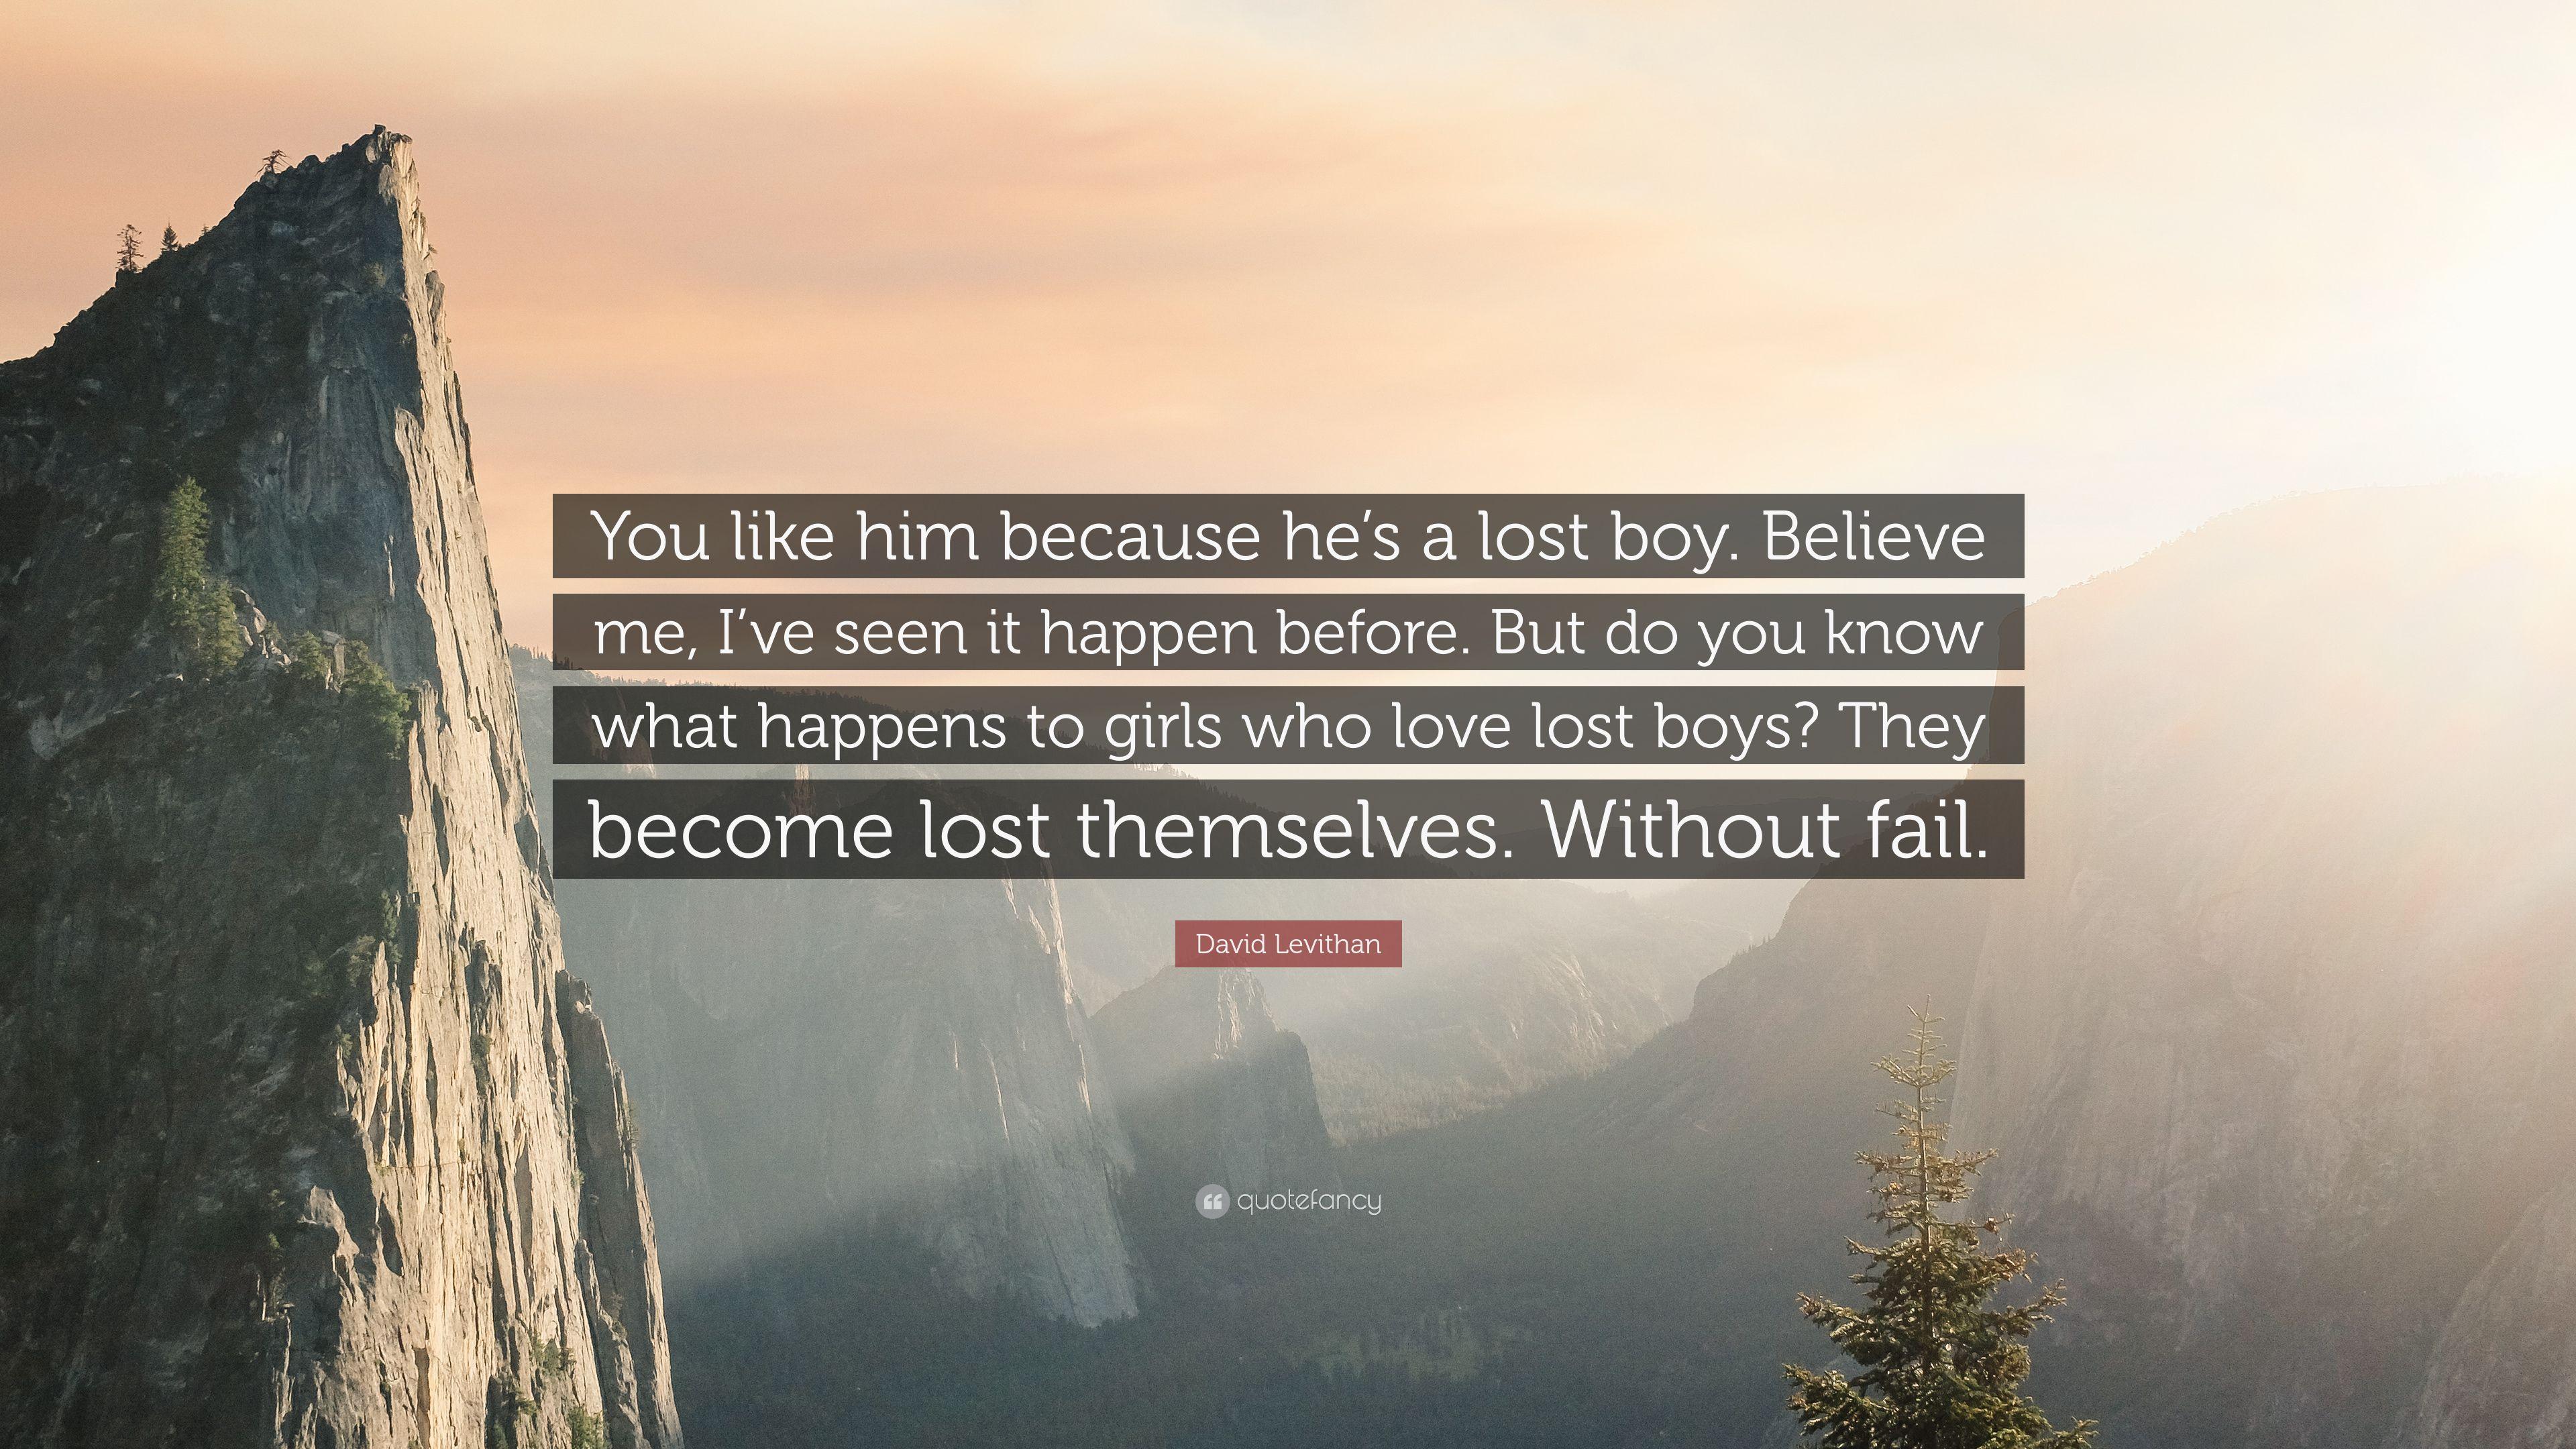 David Levithan Quote: “You like him because he's a lost boy. Believe